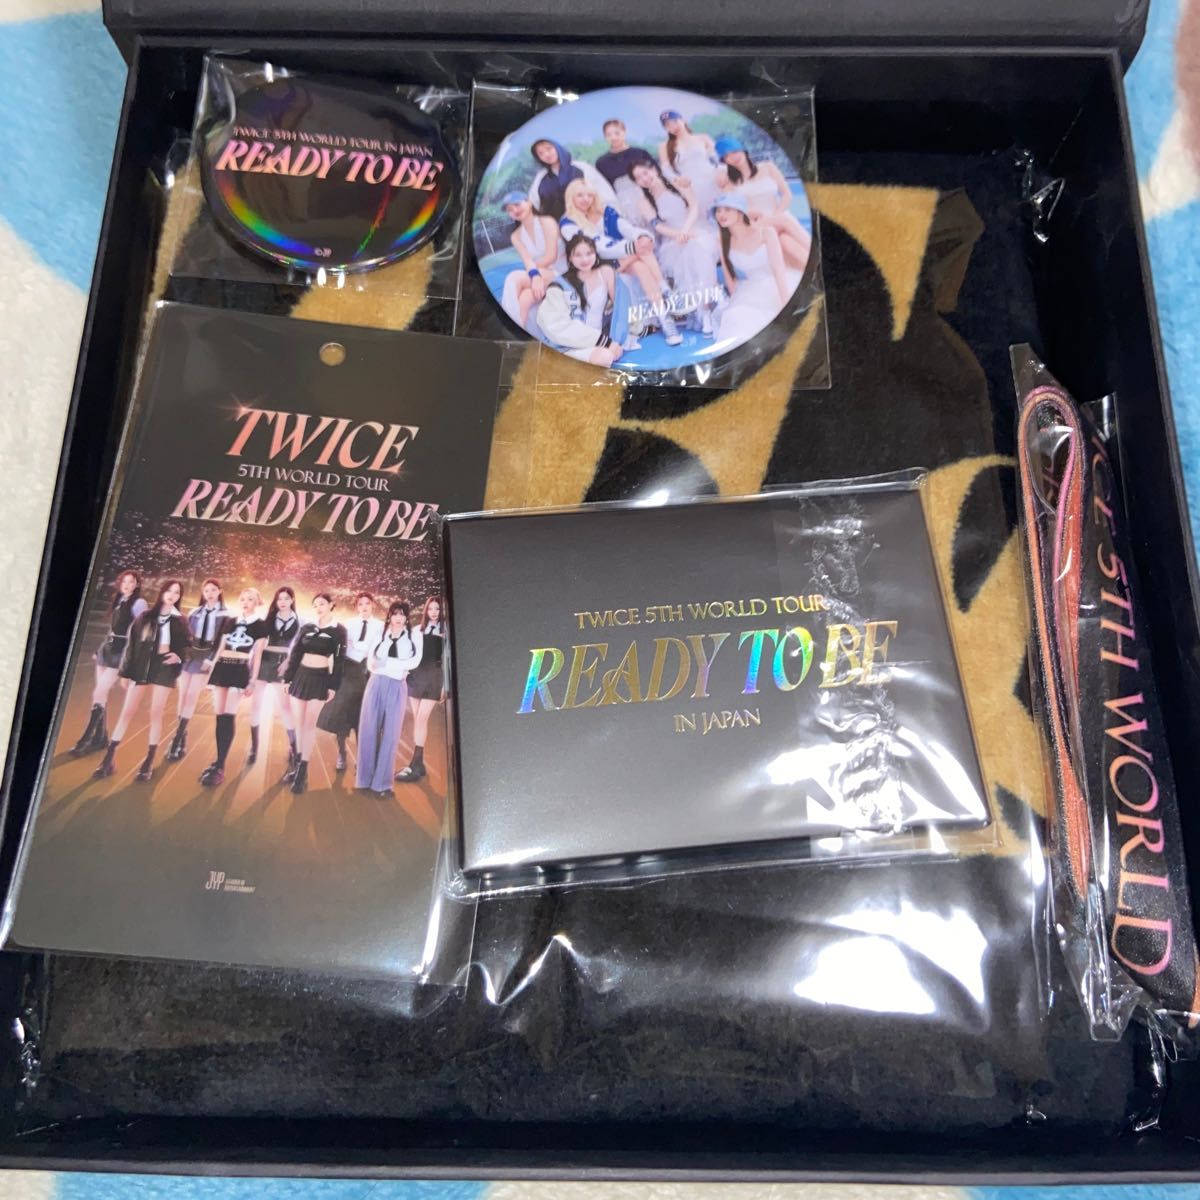 TWICE 5TH WORLD TOUR READY TO BE アップグレード限定 専用グッズ　銀テープ付♪